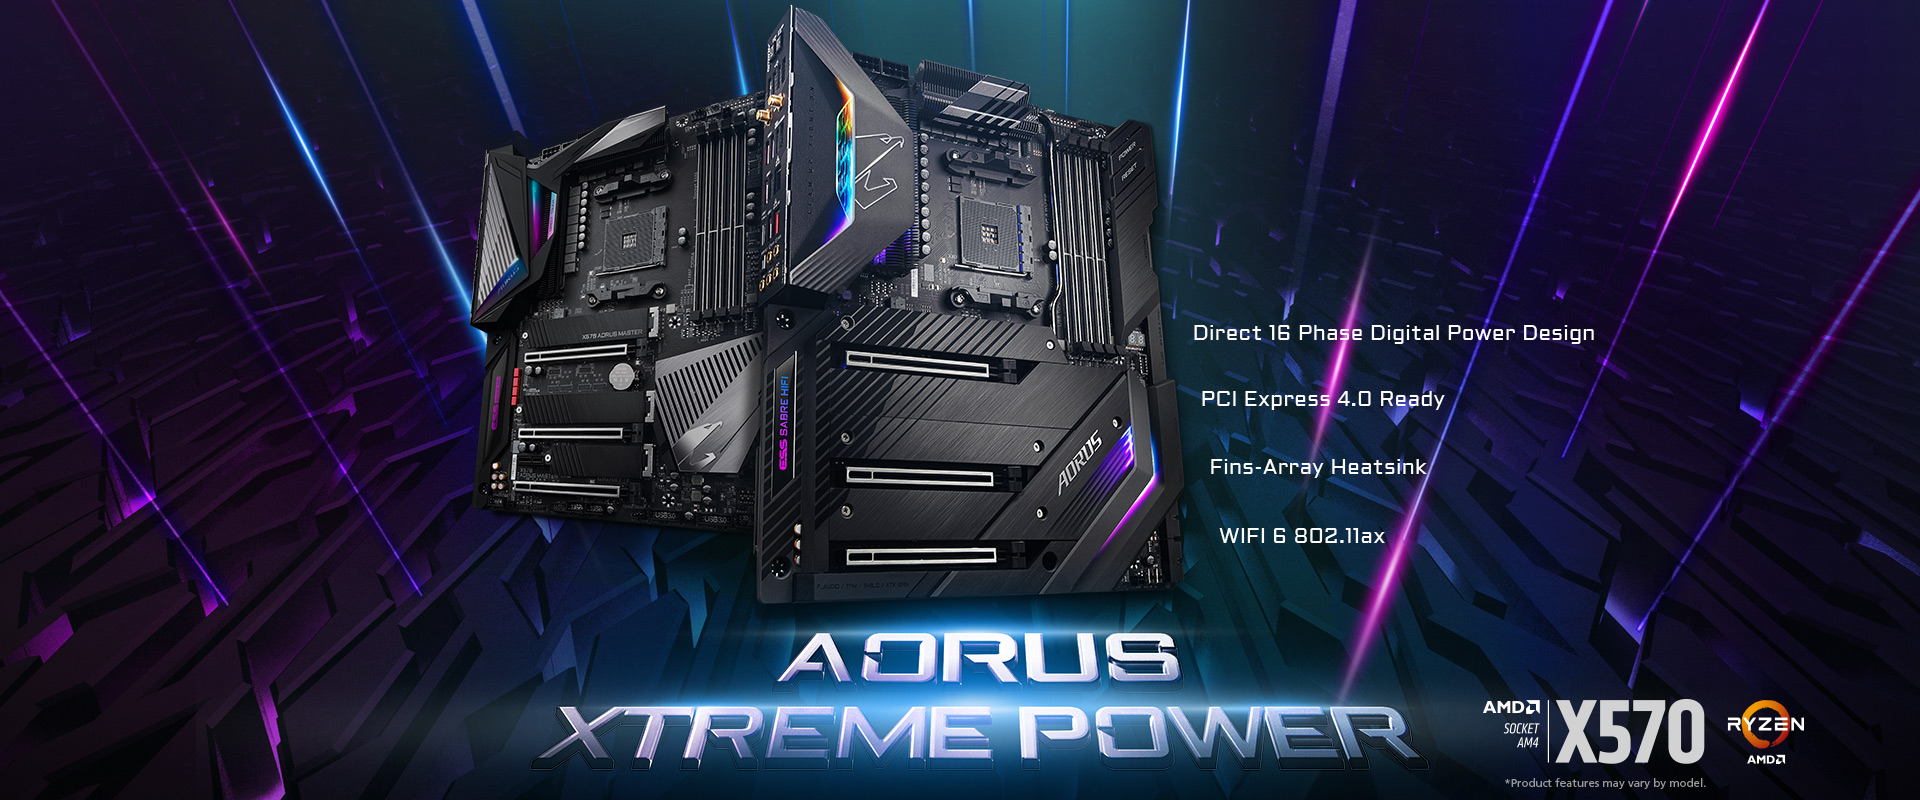 GIGABYTE Advances To PCIe 4.0 With X570 AORUS Motherboards